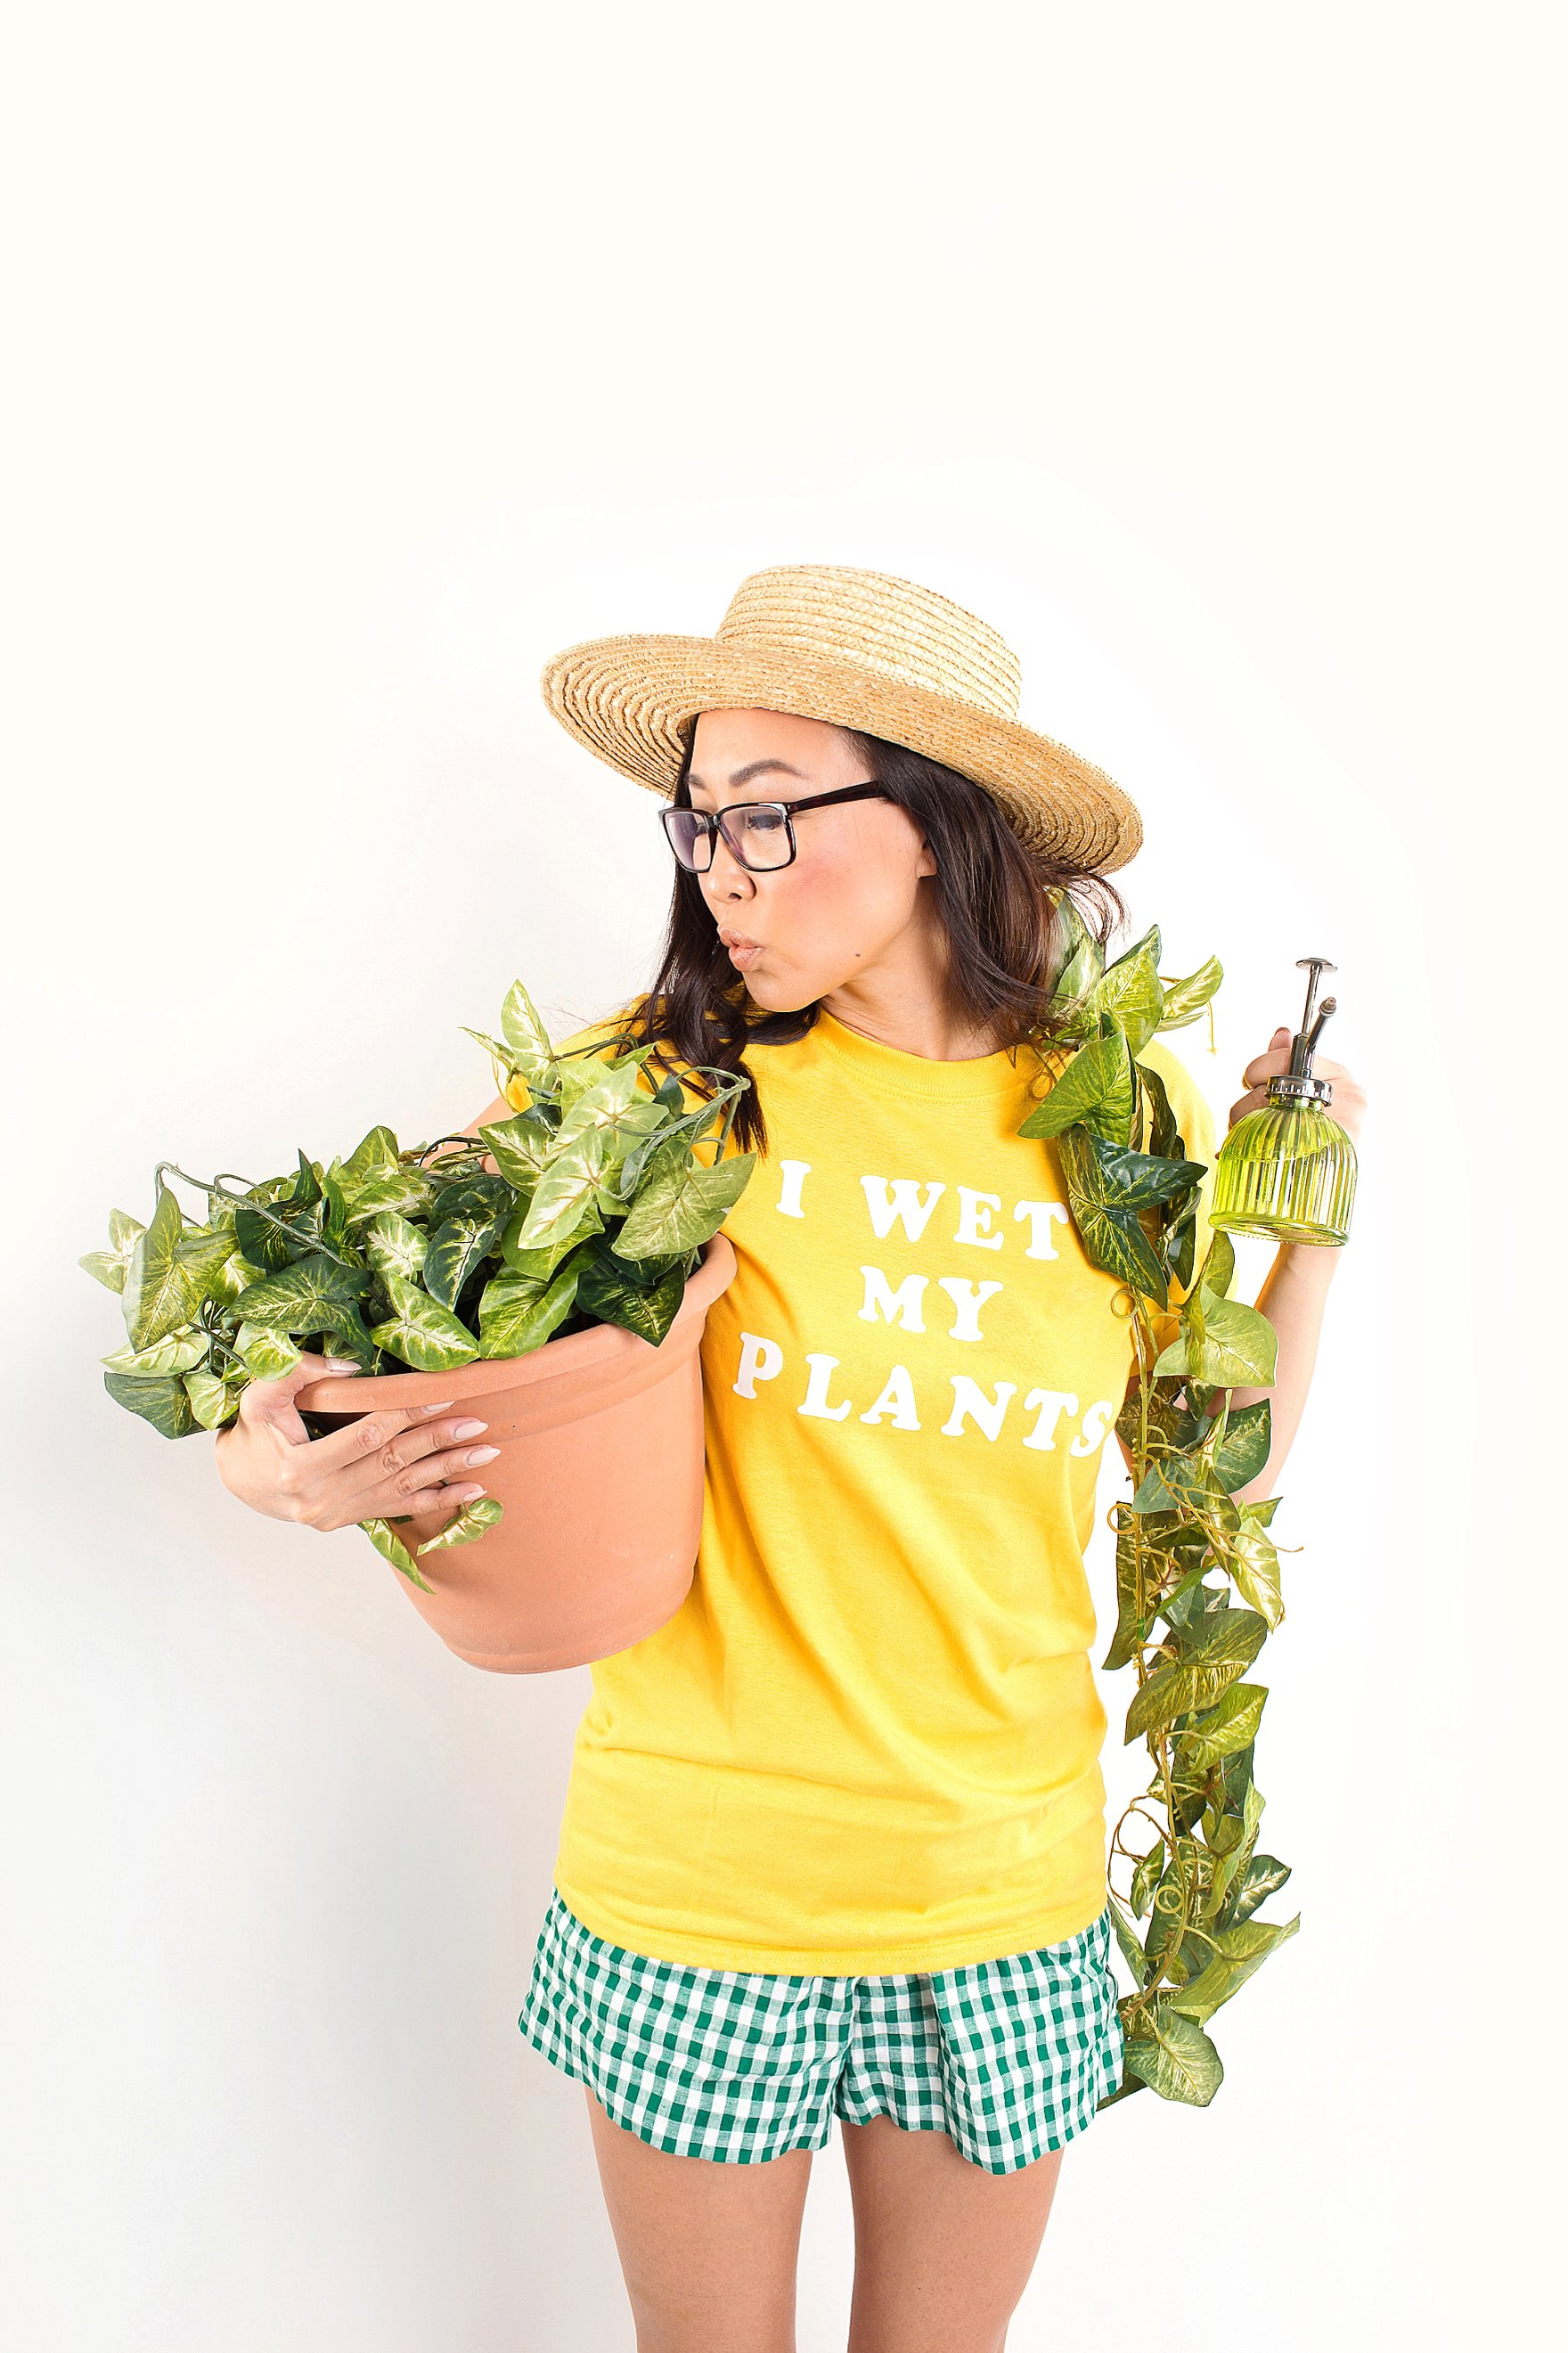 crazy plant lady halloween costume creative adult funny